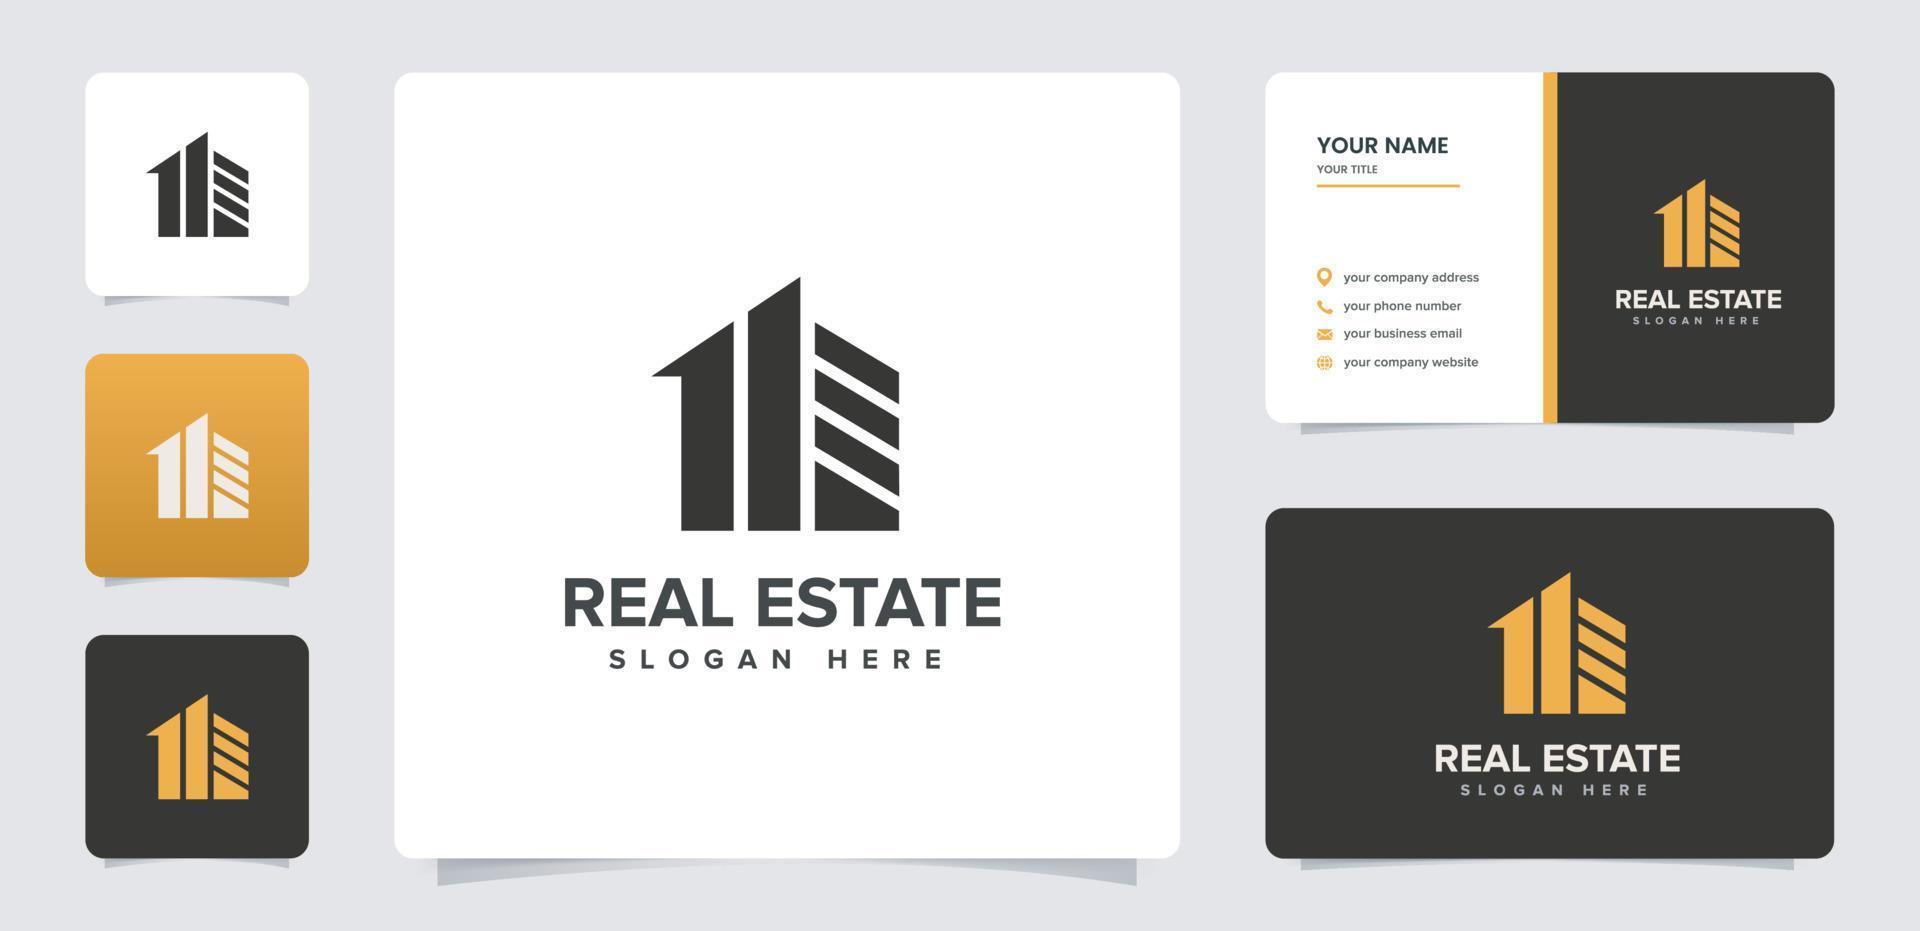 real estate, architecture, construction logo for property logo with business card template vector